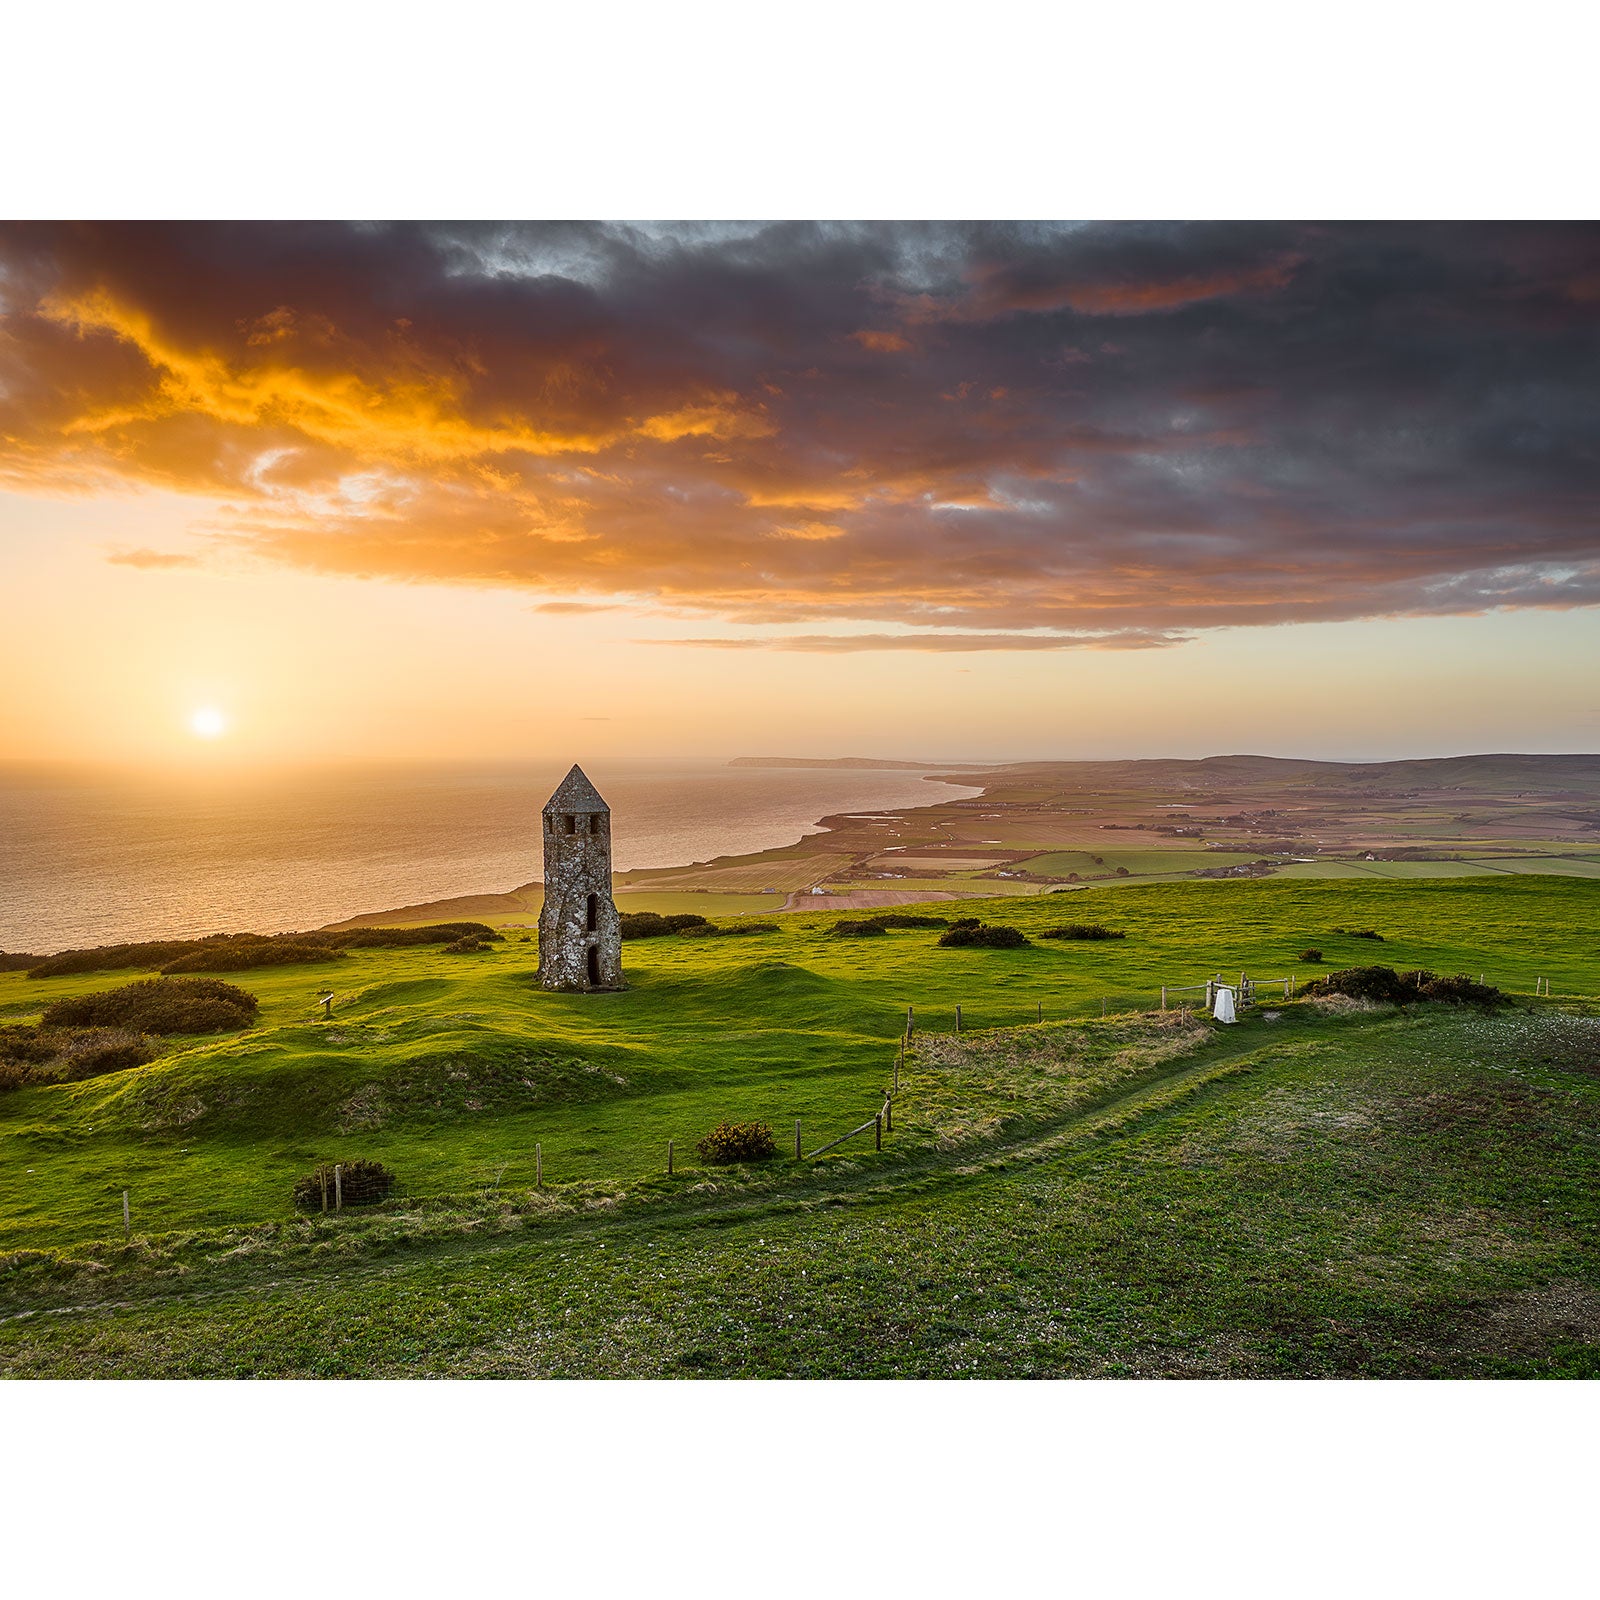 An ancient tower overlooking a coastal landscape at sunset is challenging to extract relevant SEO keywords without a descriptive St. Catherine's Oratory product description beyond the image number.